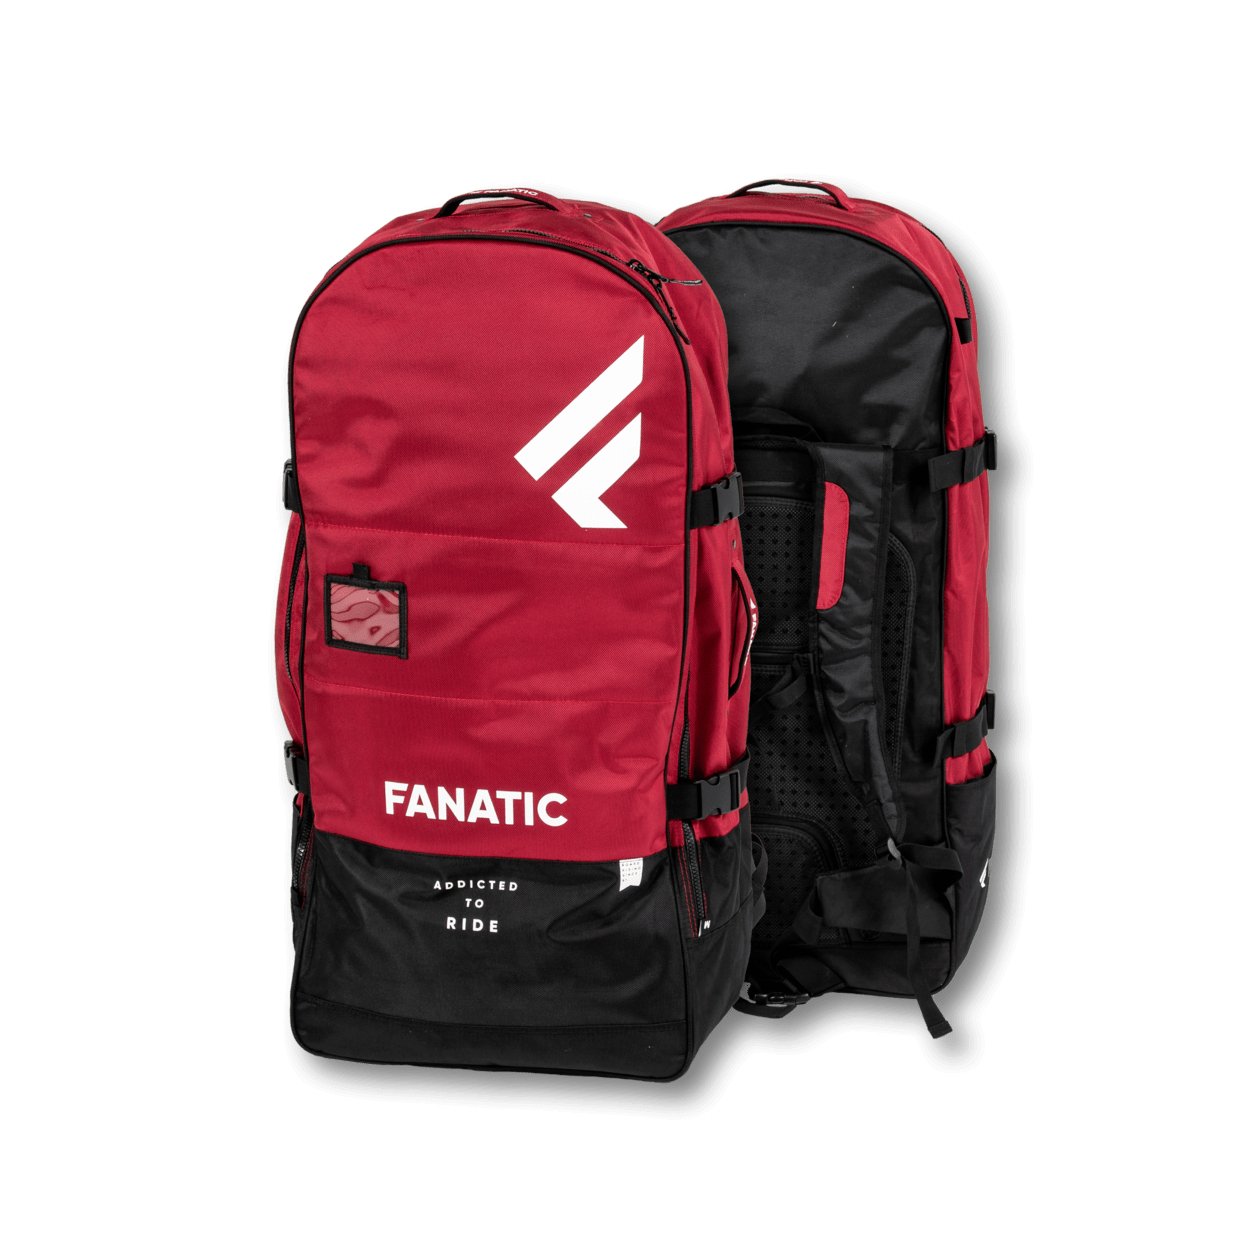 Fanatic Gearbag Pure iSUP 2023 - Worthing Watersports - 9010583037370 - Spareparts - Fanatic SUP